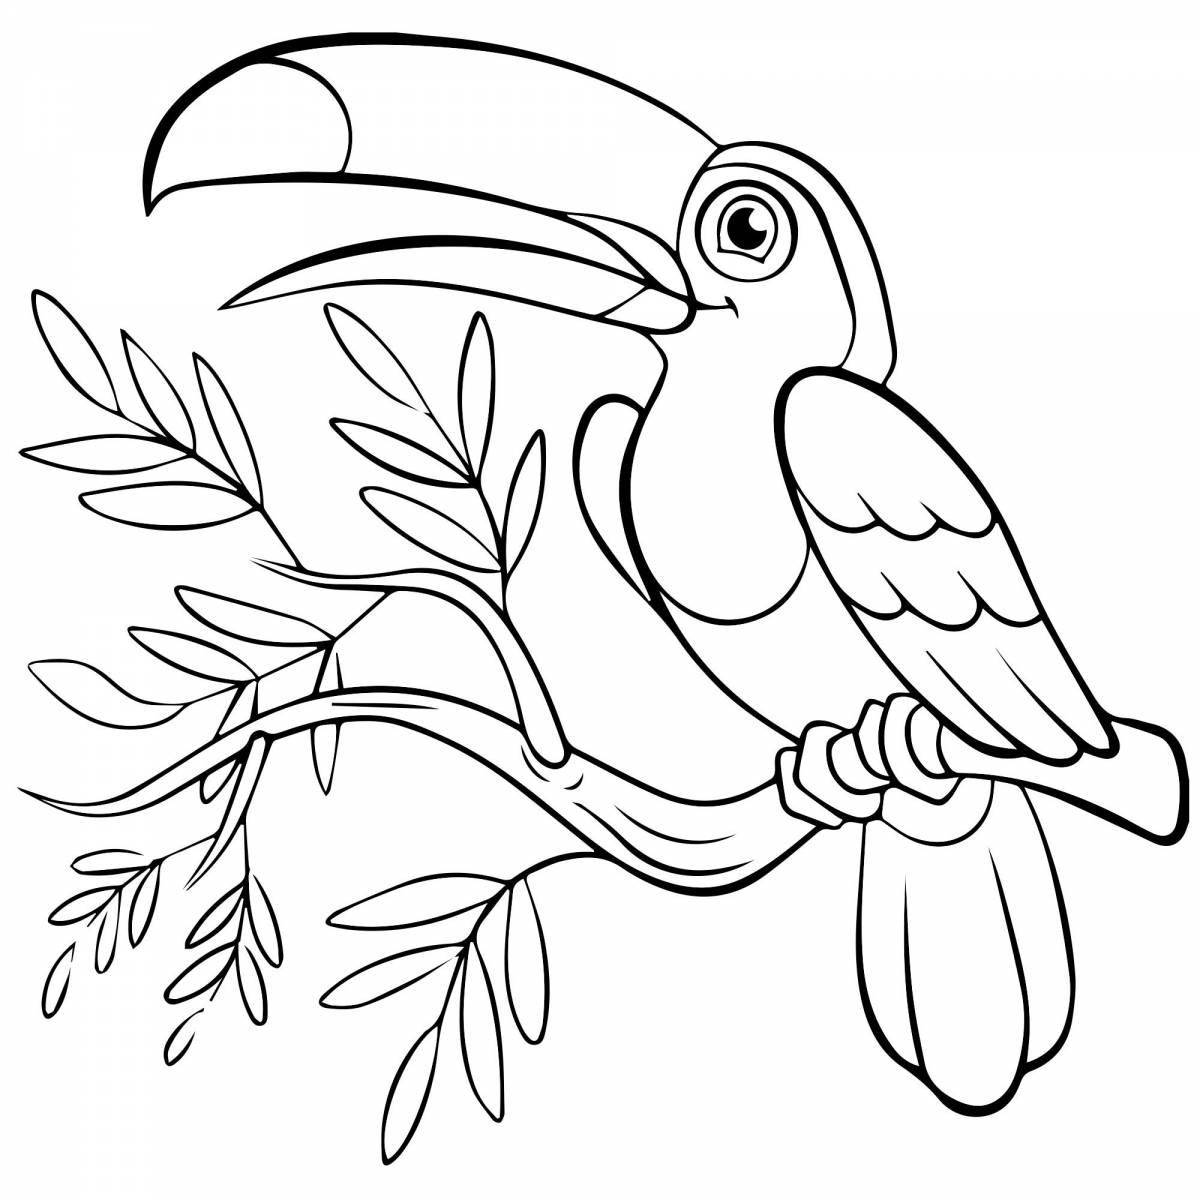 Radiant coloring page drawing of a bird